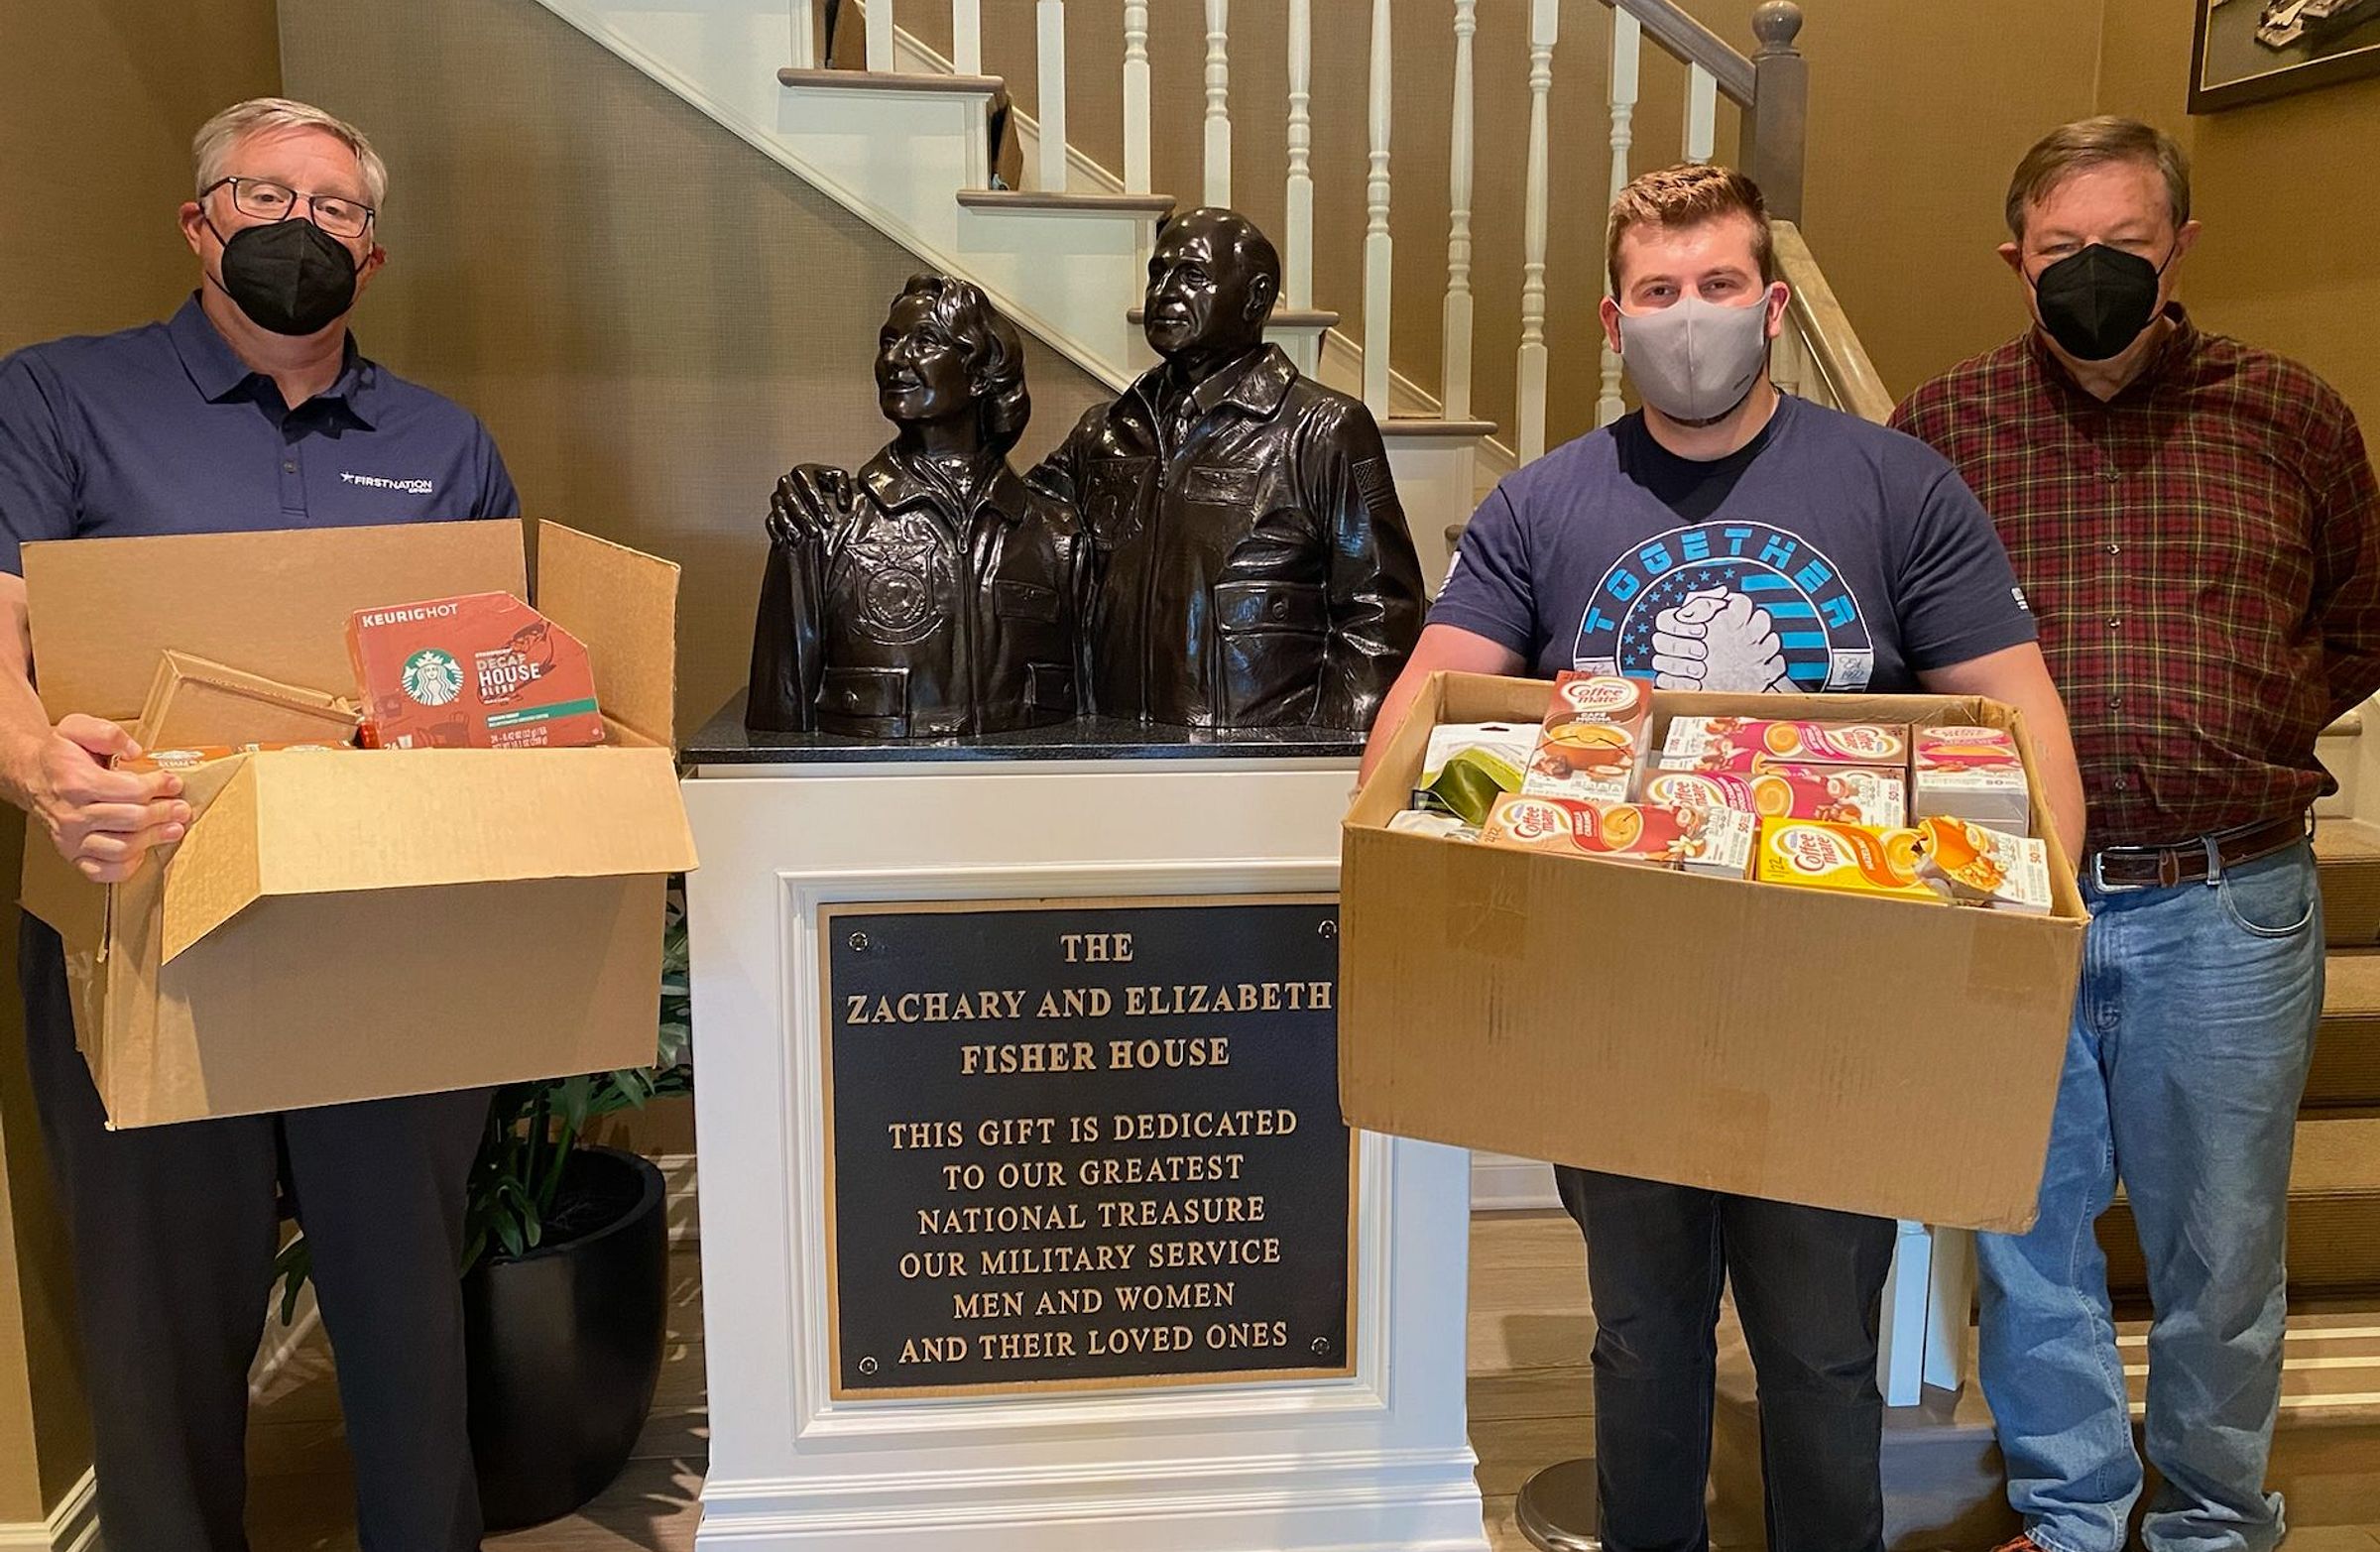 A group of three men hold large boxes of donations and pose for a photo